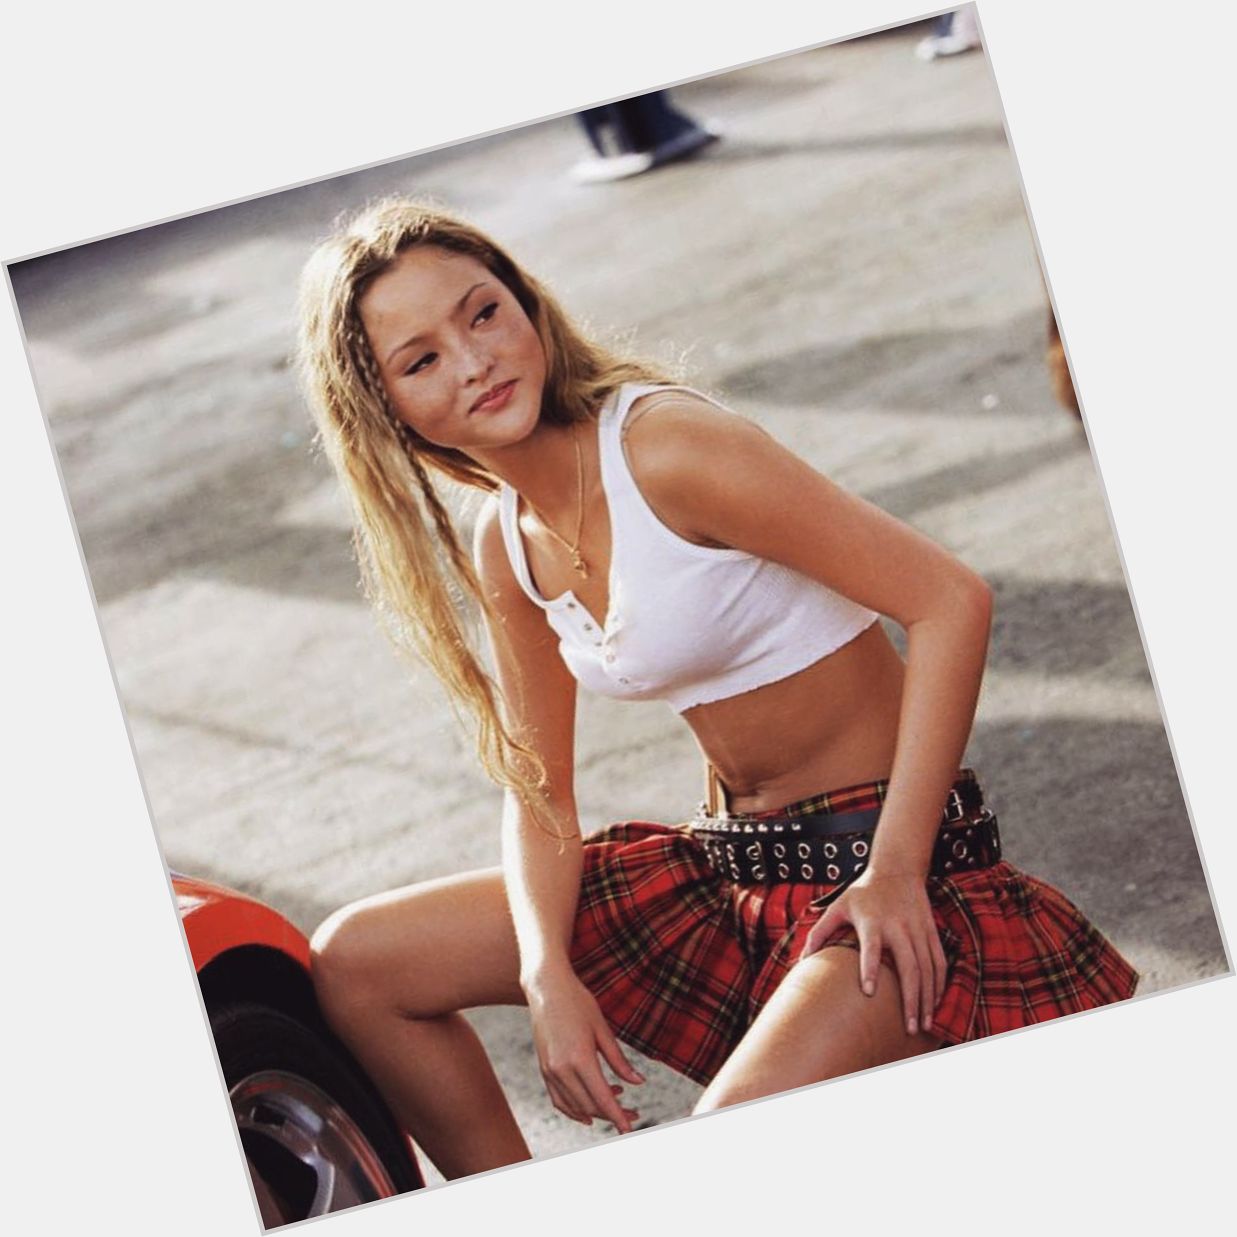 Happy birthday to Devon Aoki! Our queen turns 38 today!

What\s your favorite look of hers? 